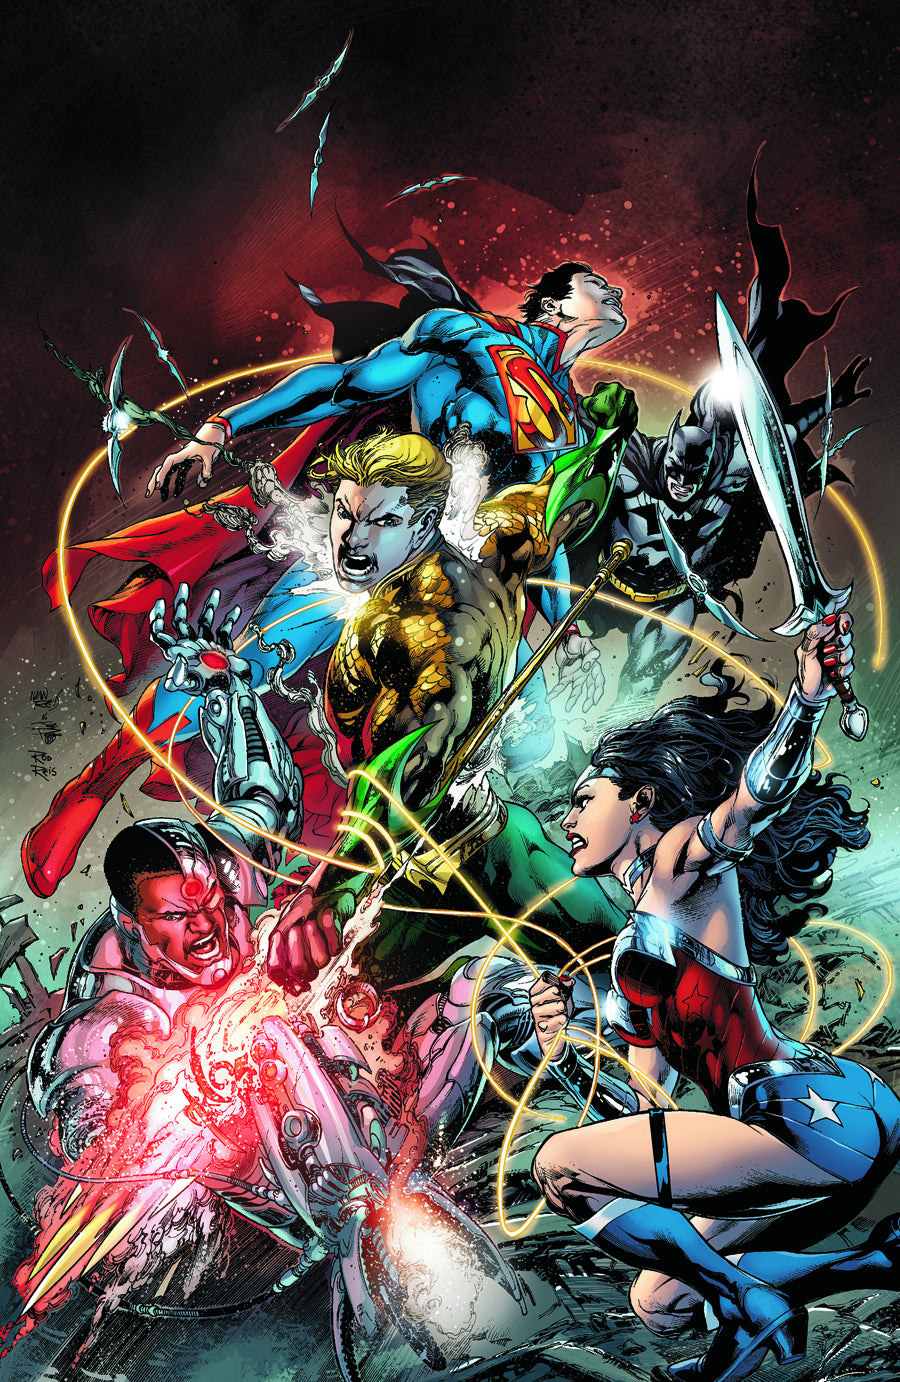 JUSTICE LEAGUE #16 | Game Master's Emporium (The New GME)